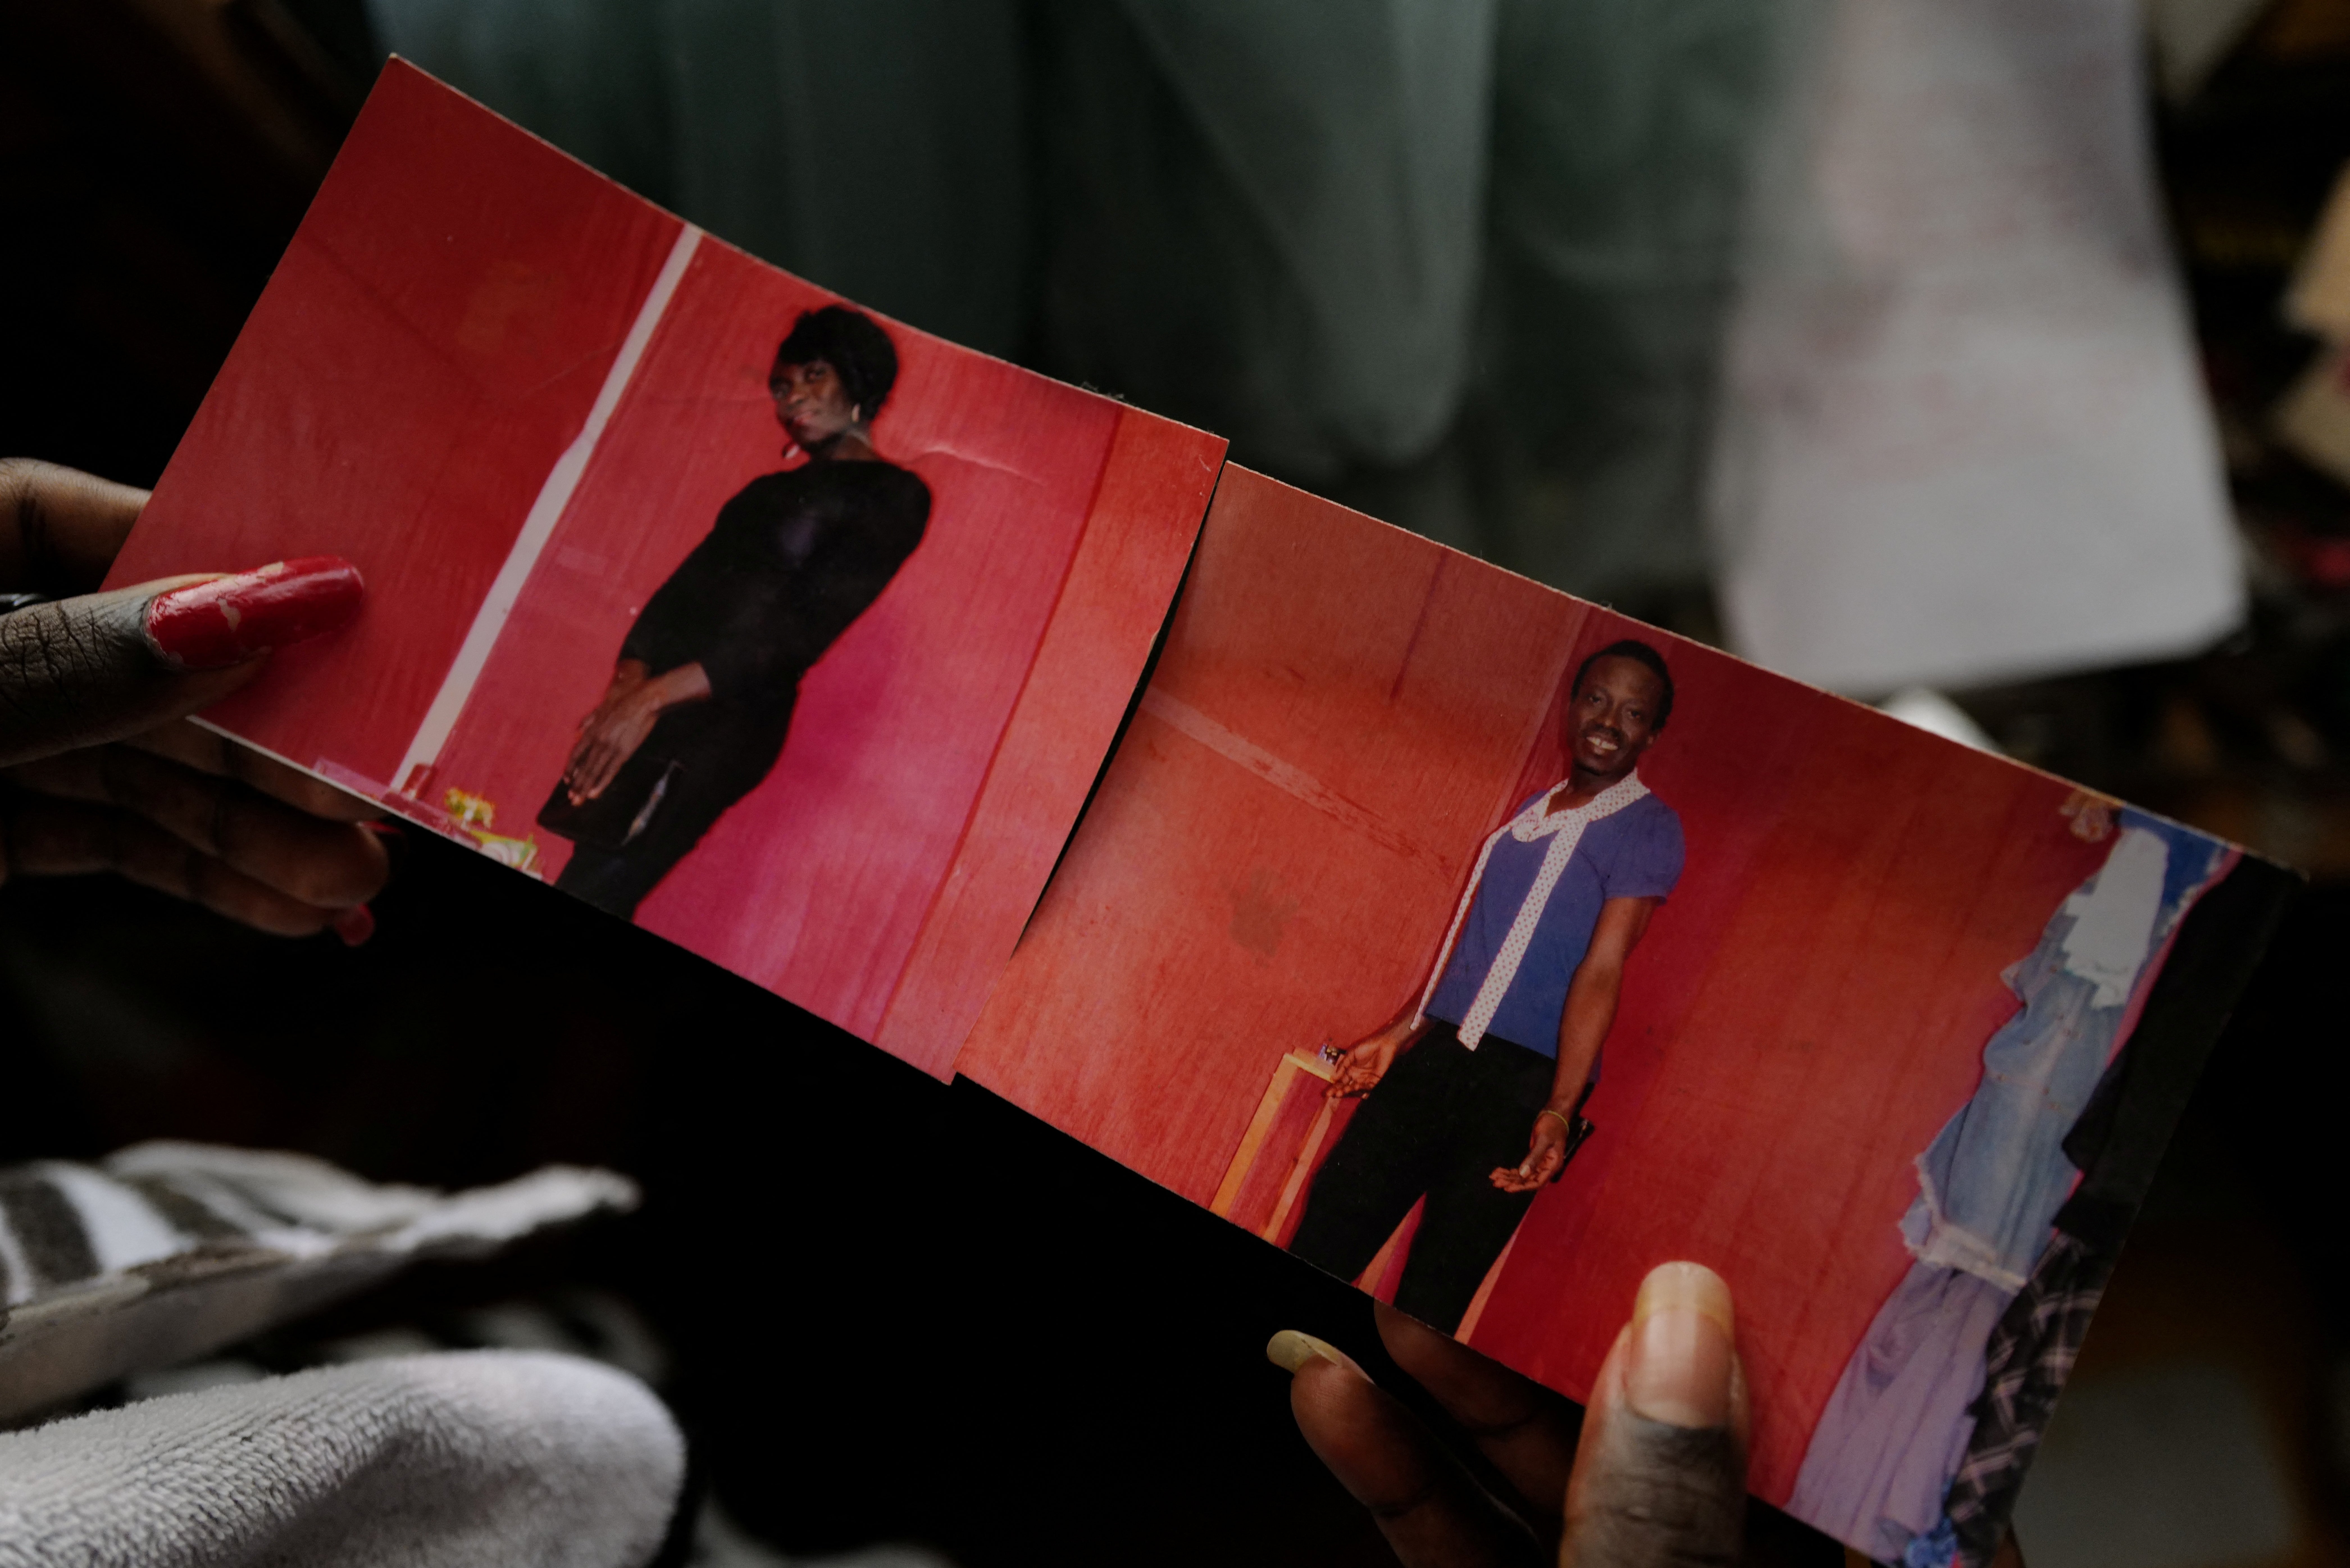 Fiatsi holds two photographs showing her gender transition journey